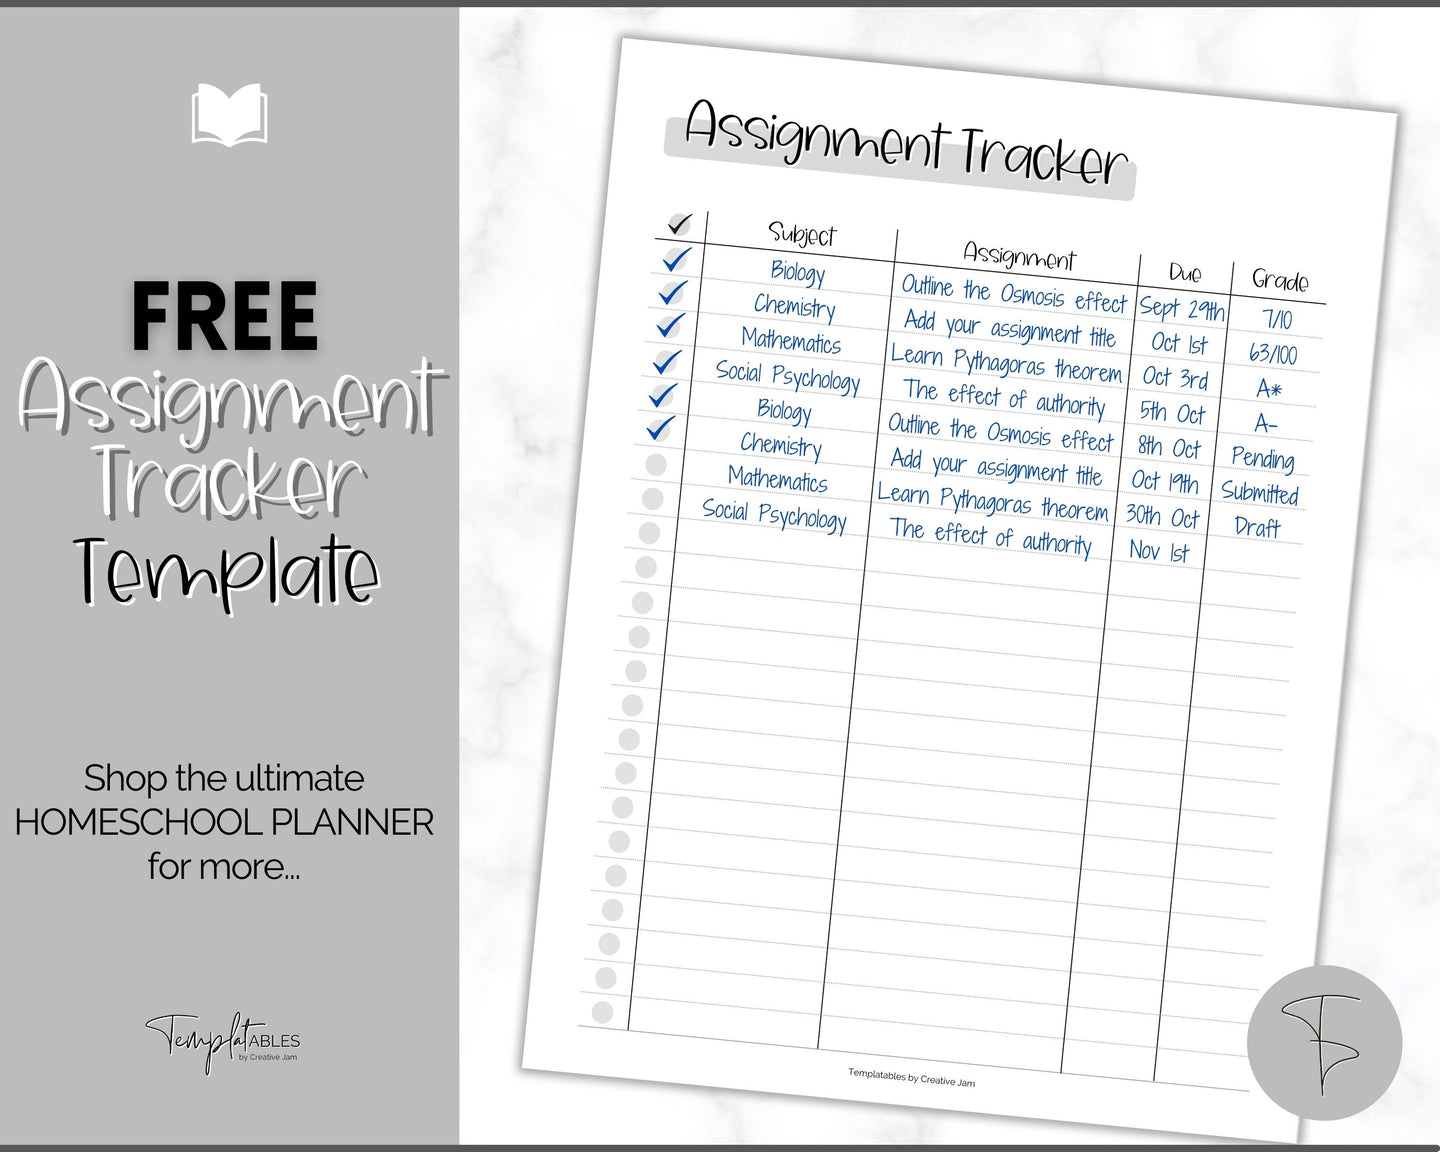 FREE - Assignment Tracker Printable for Students, Academic Homework Planner, Study, College, Homeschool Template | Mono